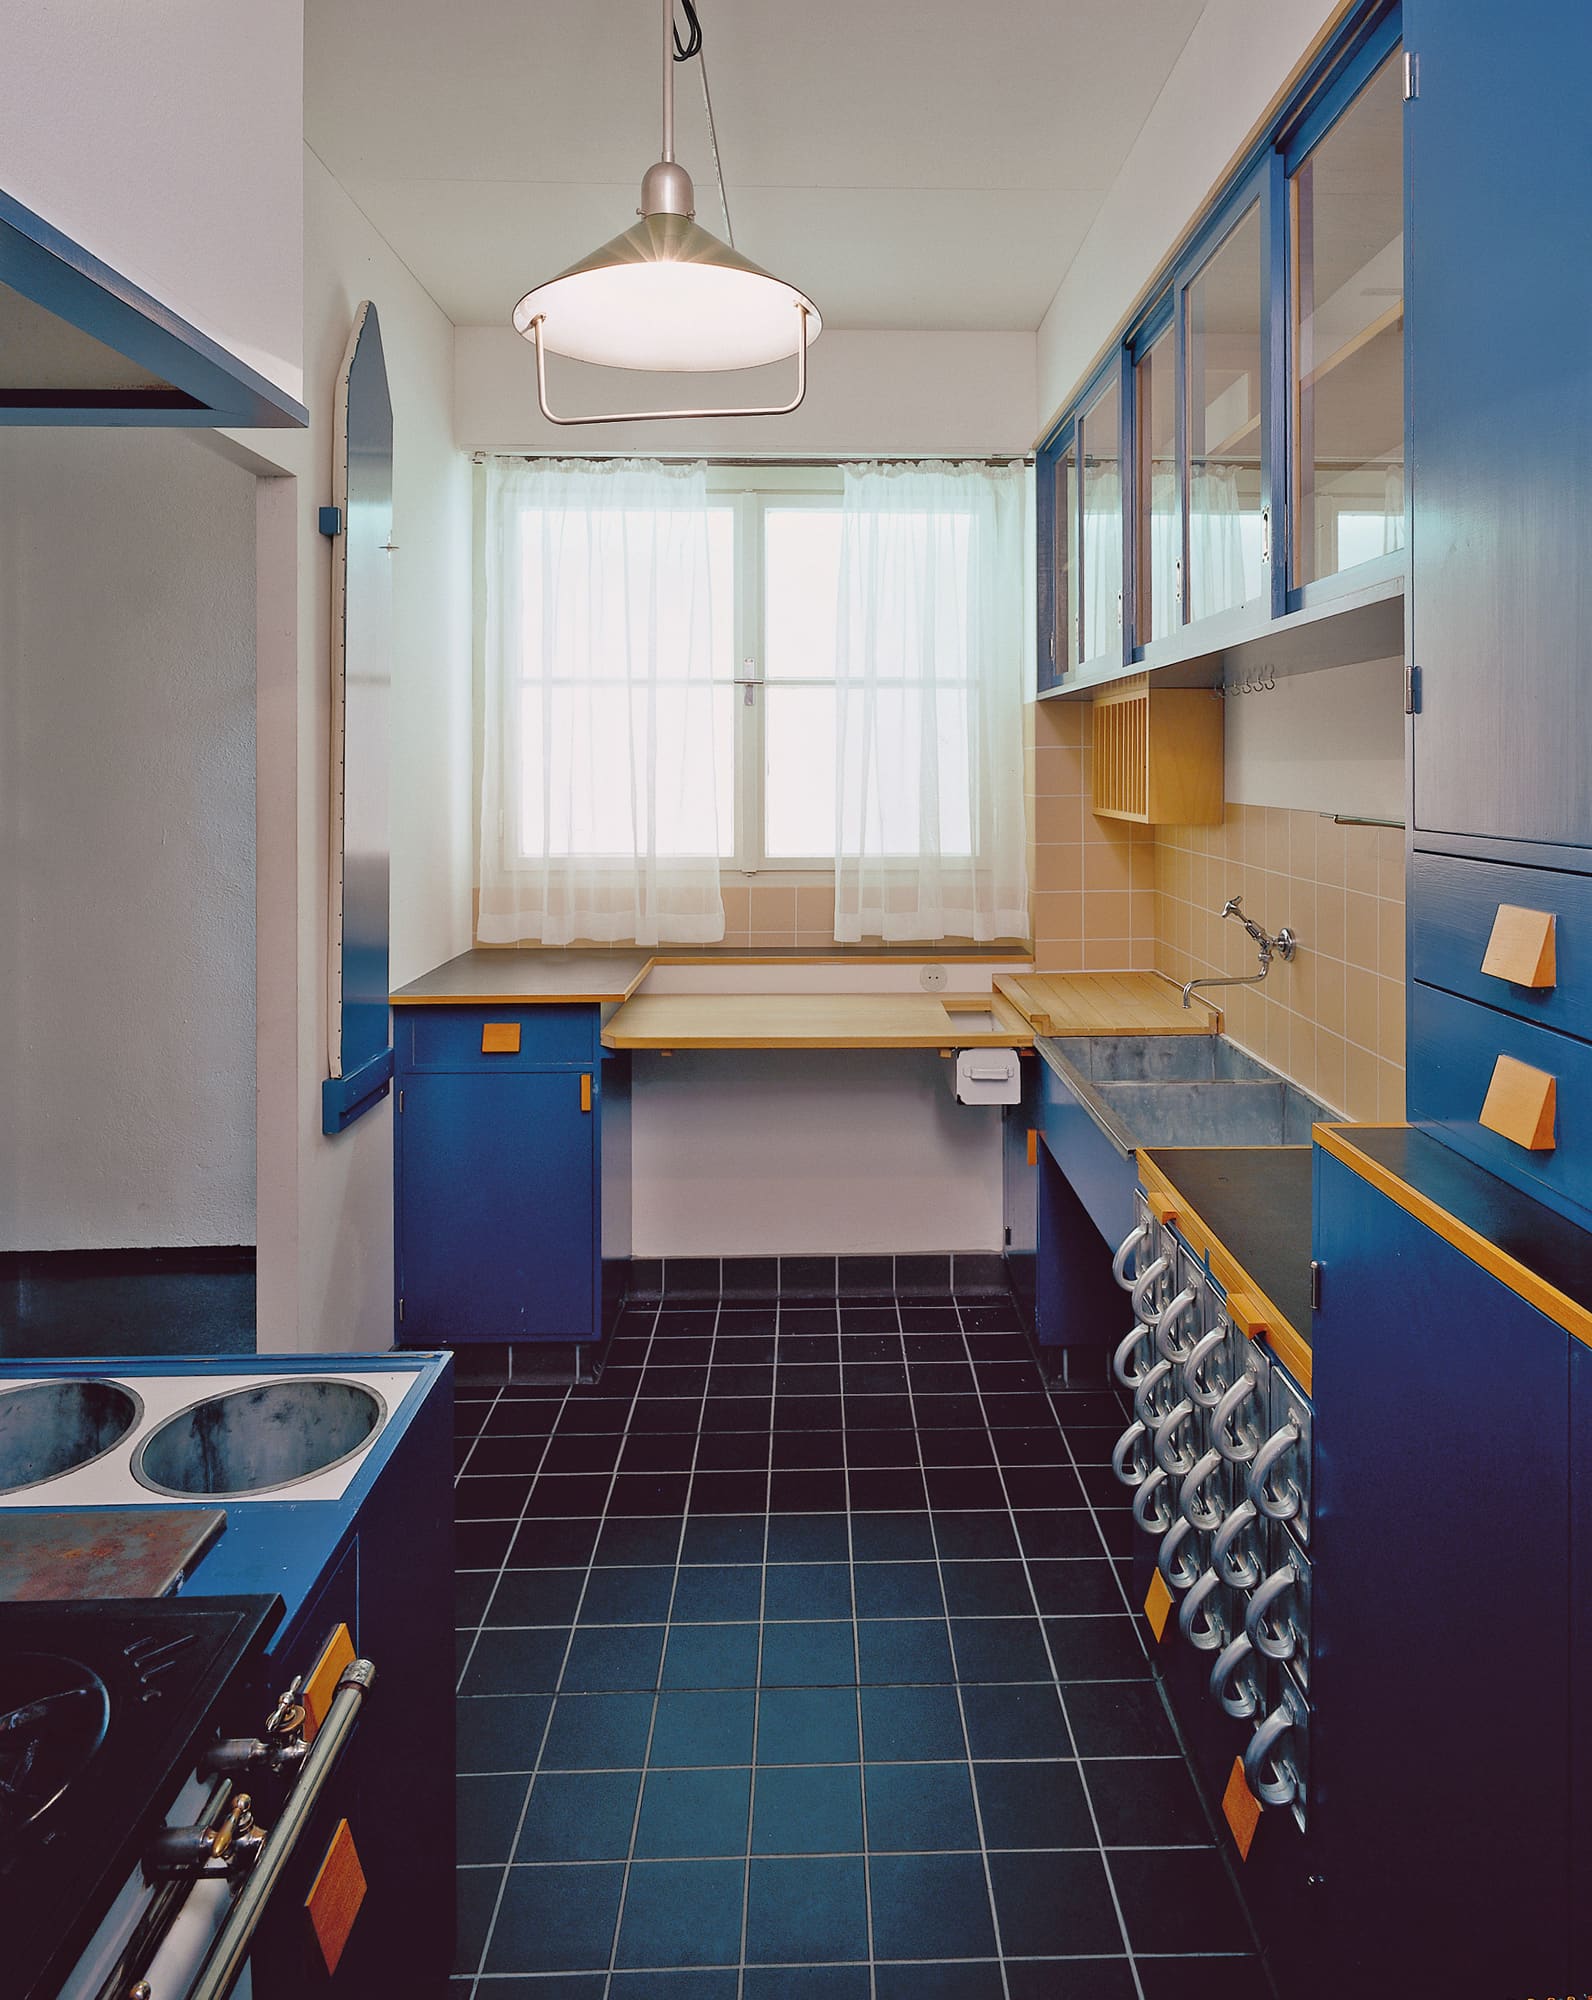 A Brief History Of Kitchen Design From The 1930s To 1940s Apartment Therapy